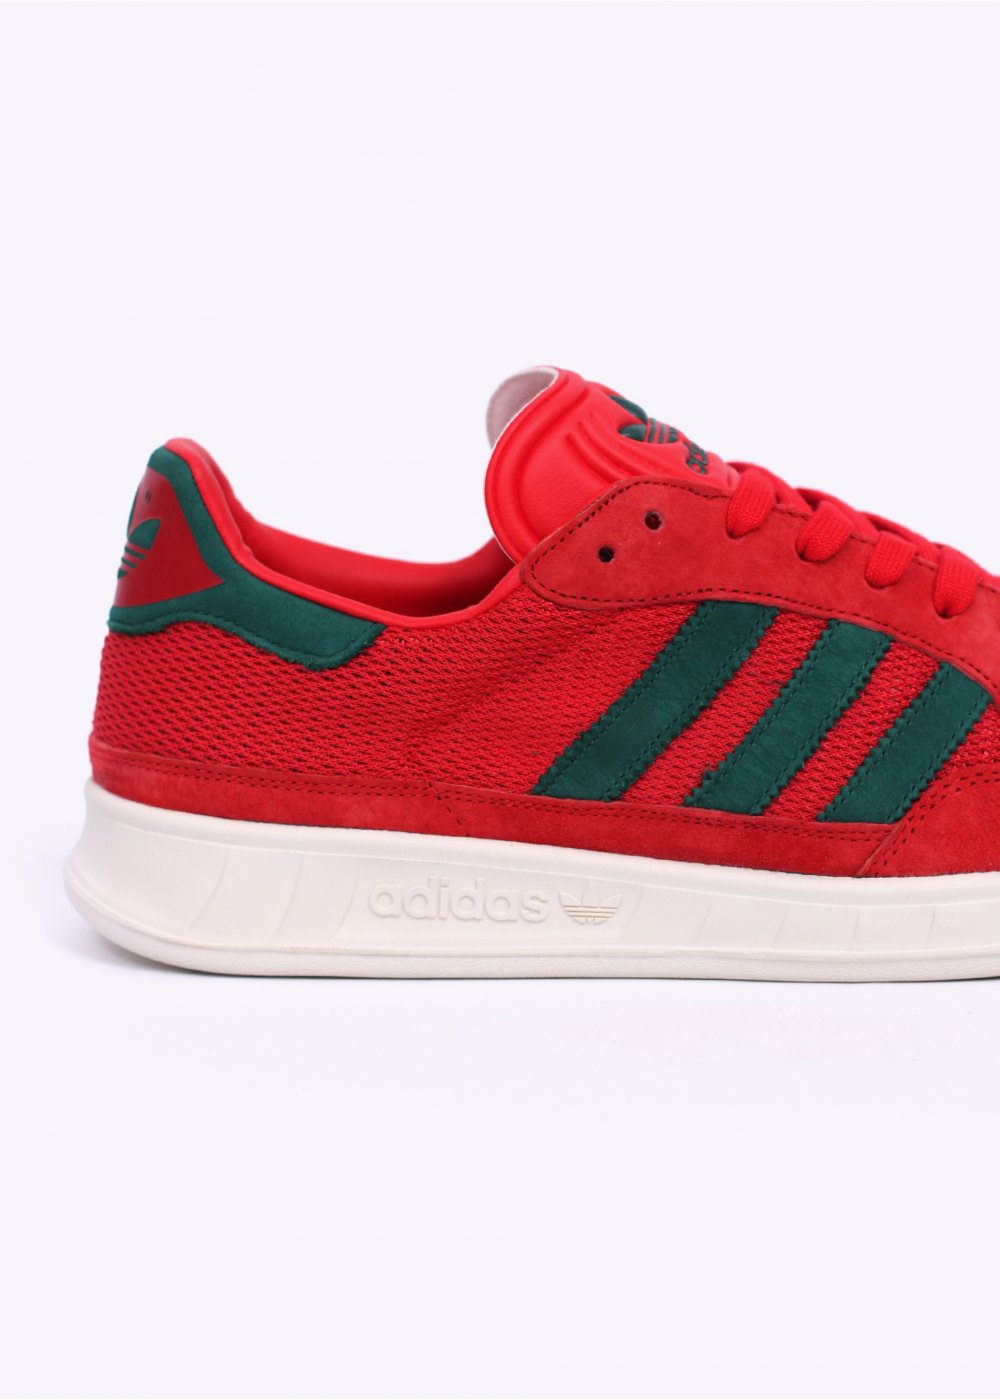 adidas red and green